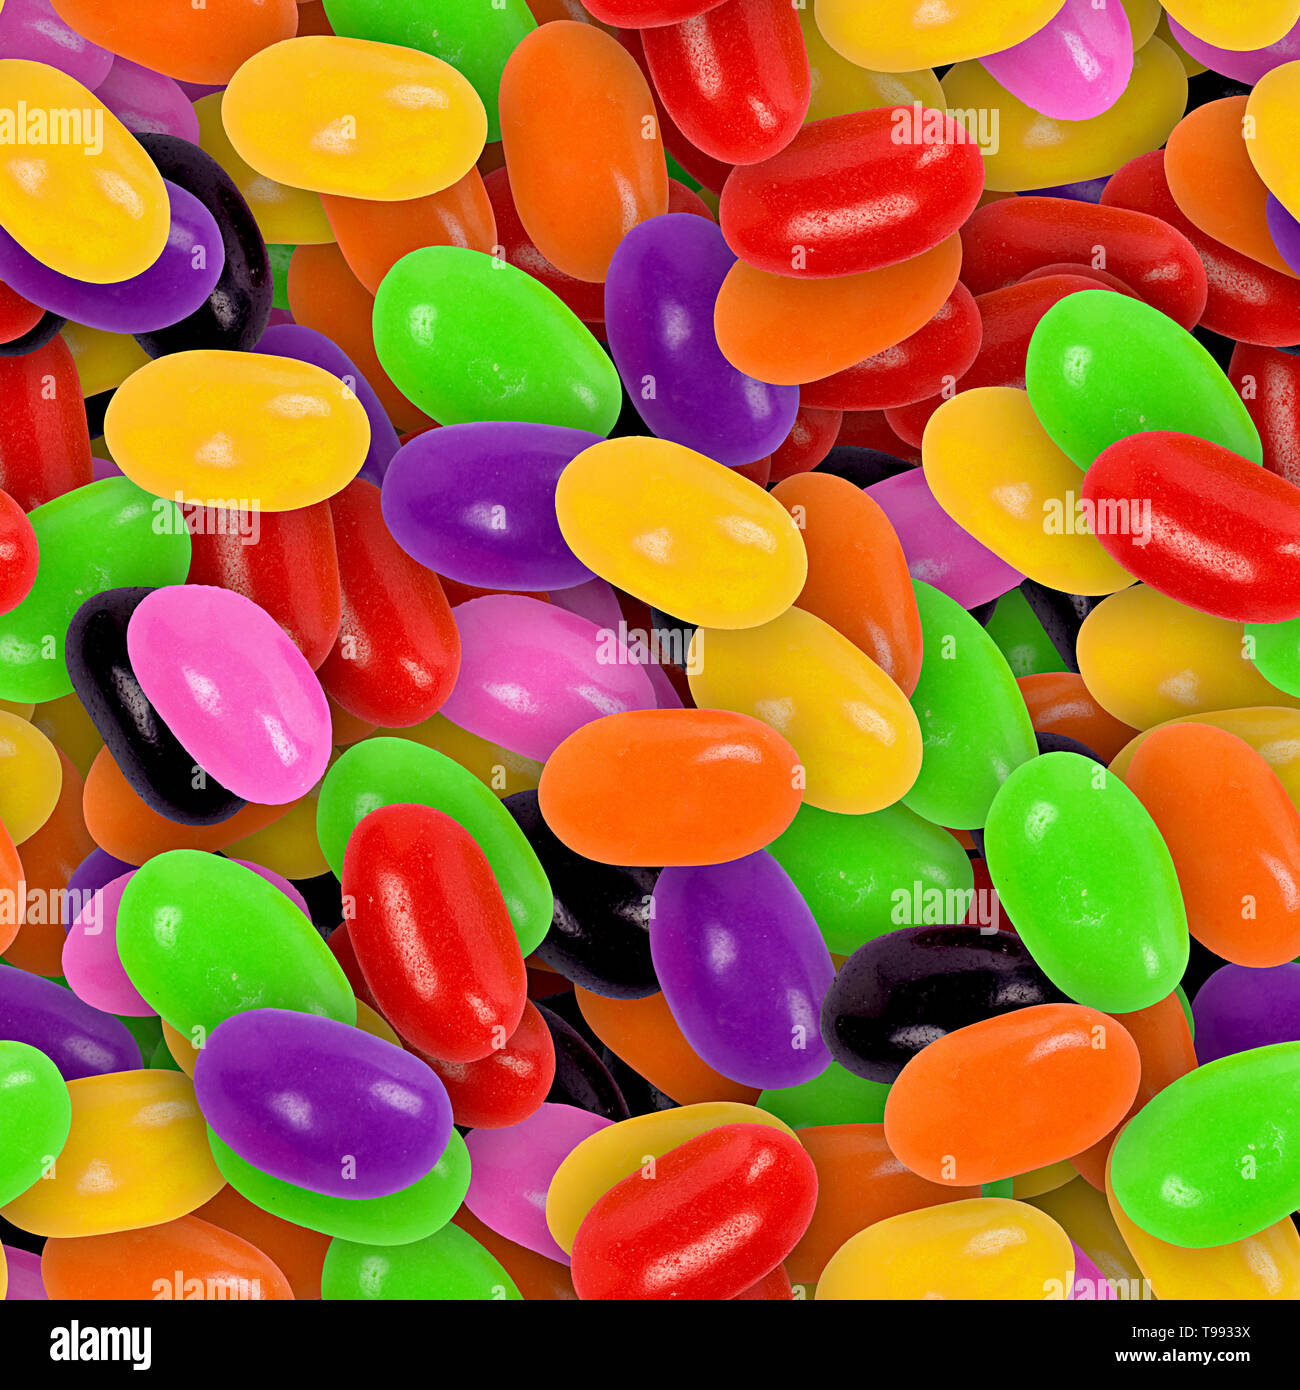 Jelly Bean Candy Seamless Texture Tile Banque D'Images